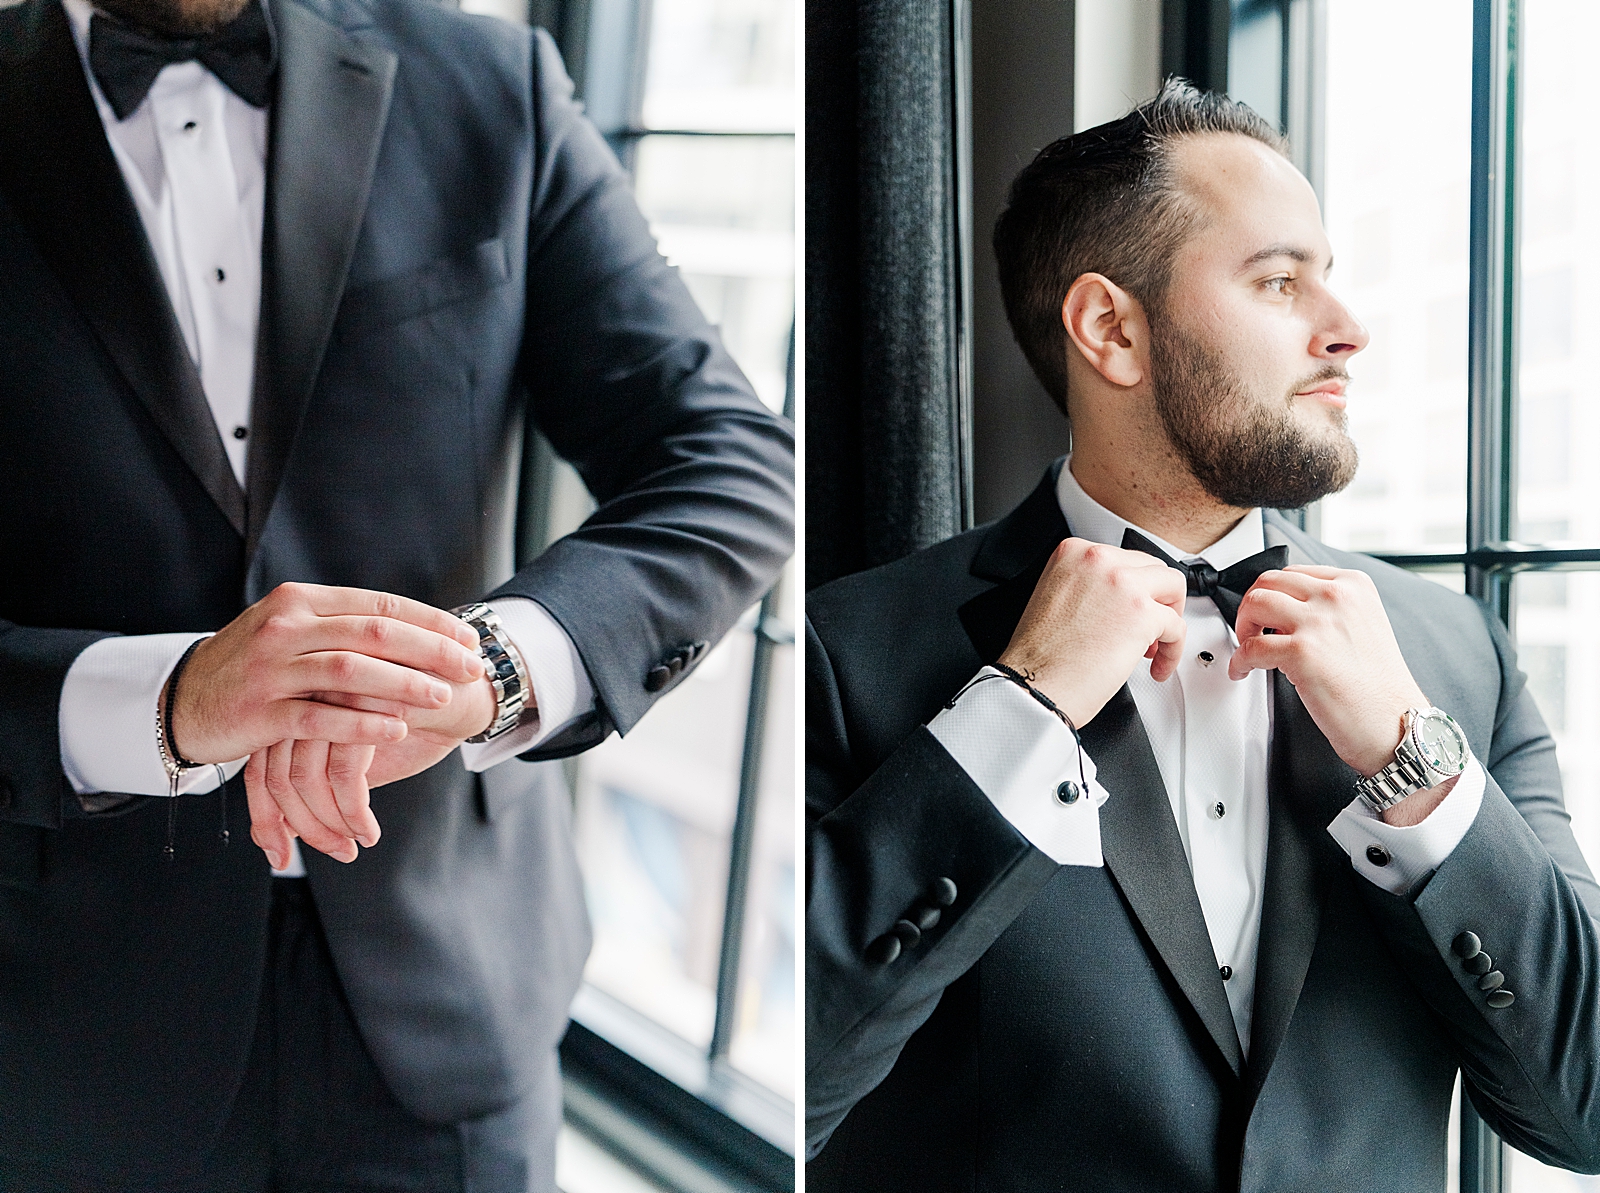 Left photo: Close up shot of the groom adjusting his watch. 
Right photo: Close up shot of the groom adjusting his bow tie. 